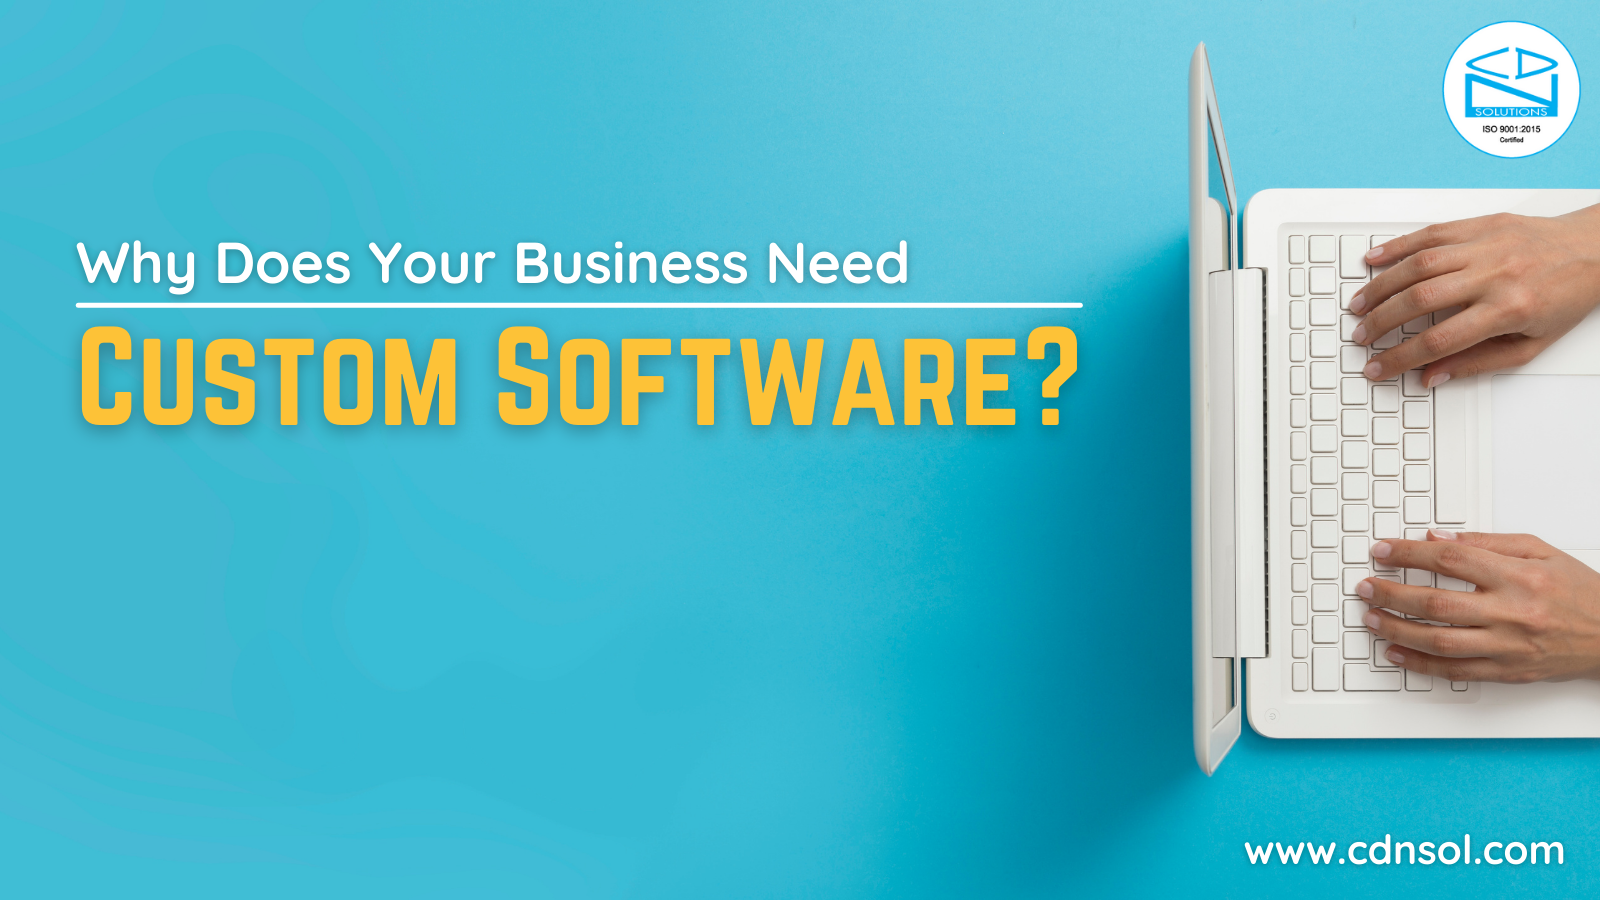 Why Does Your Business Need Custom Software?